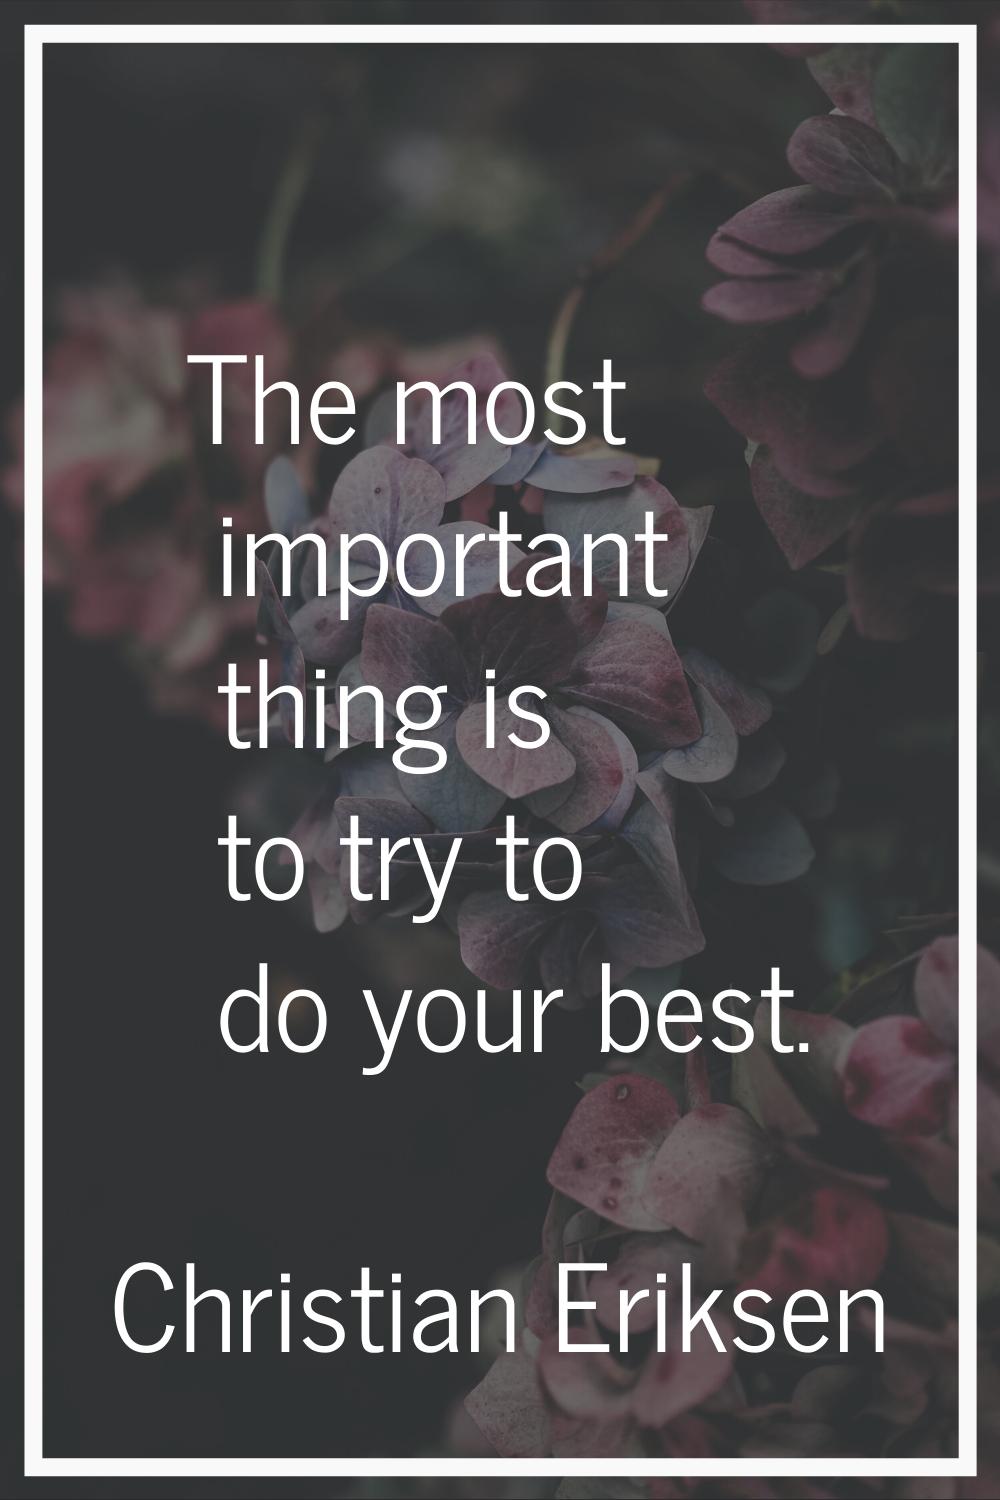 The most important thing is to try to do your best.